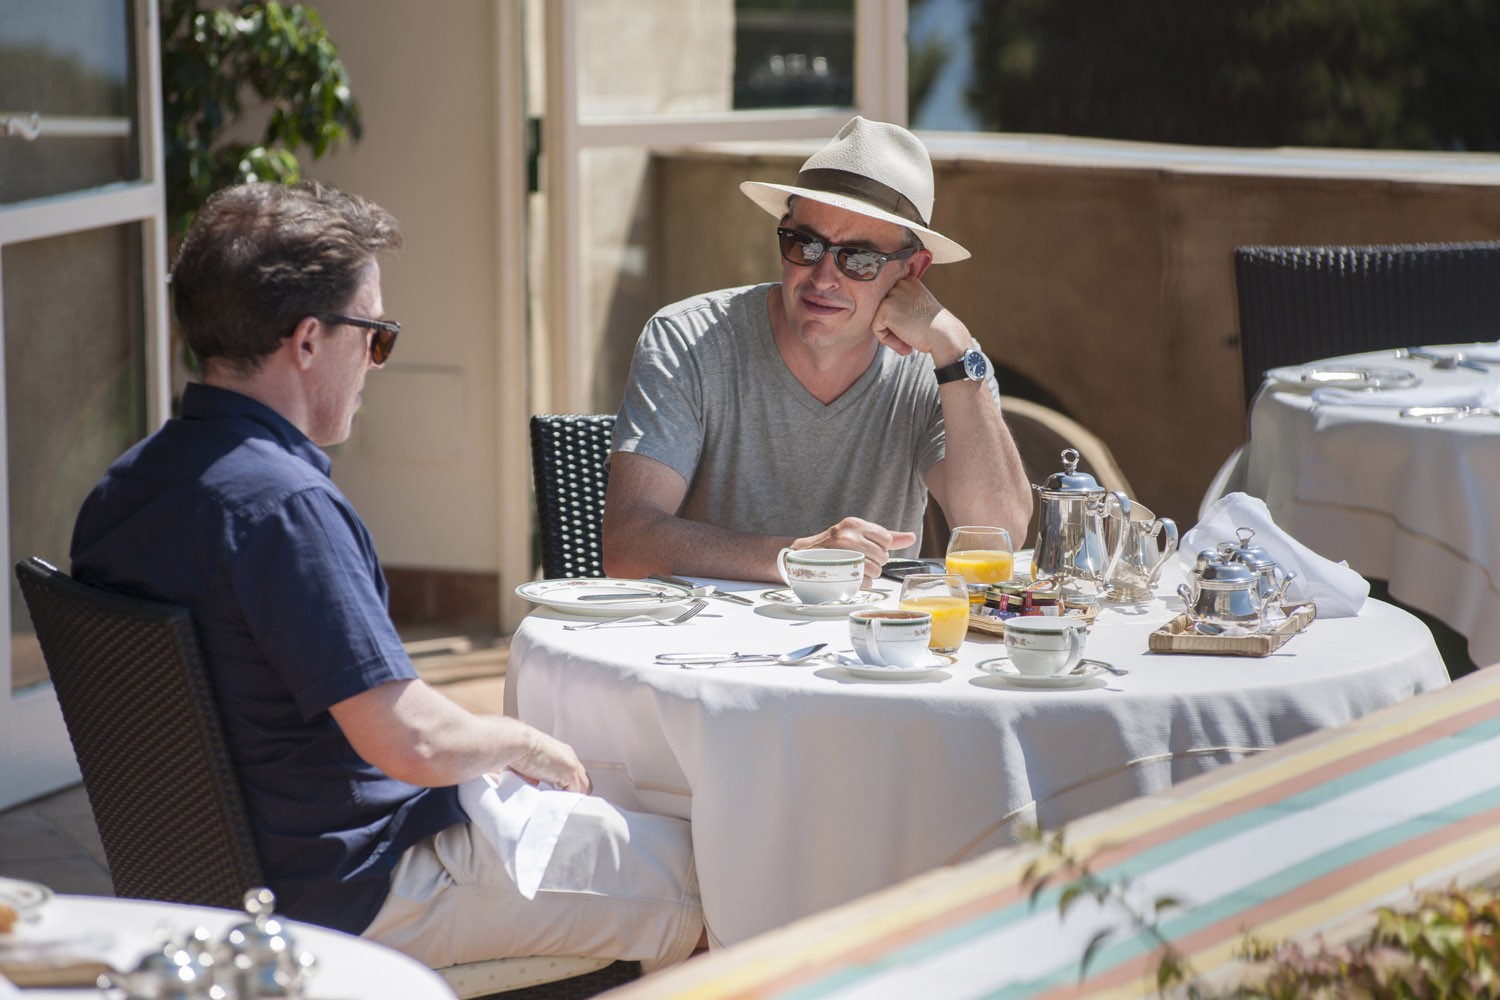 Rob Brydon and Steve Coogan in IFC Films' The Trip to Italy (2014)